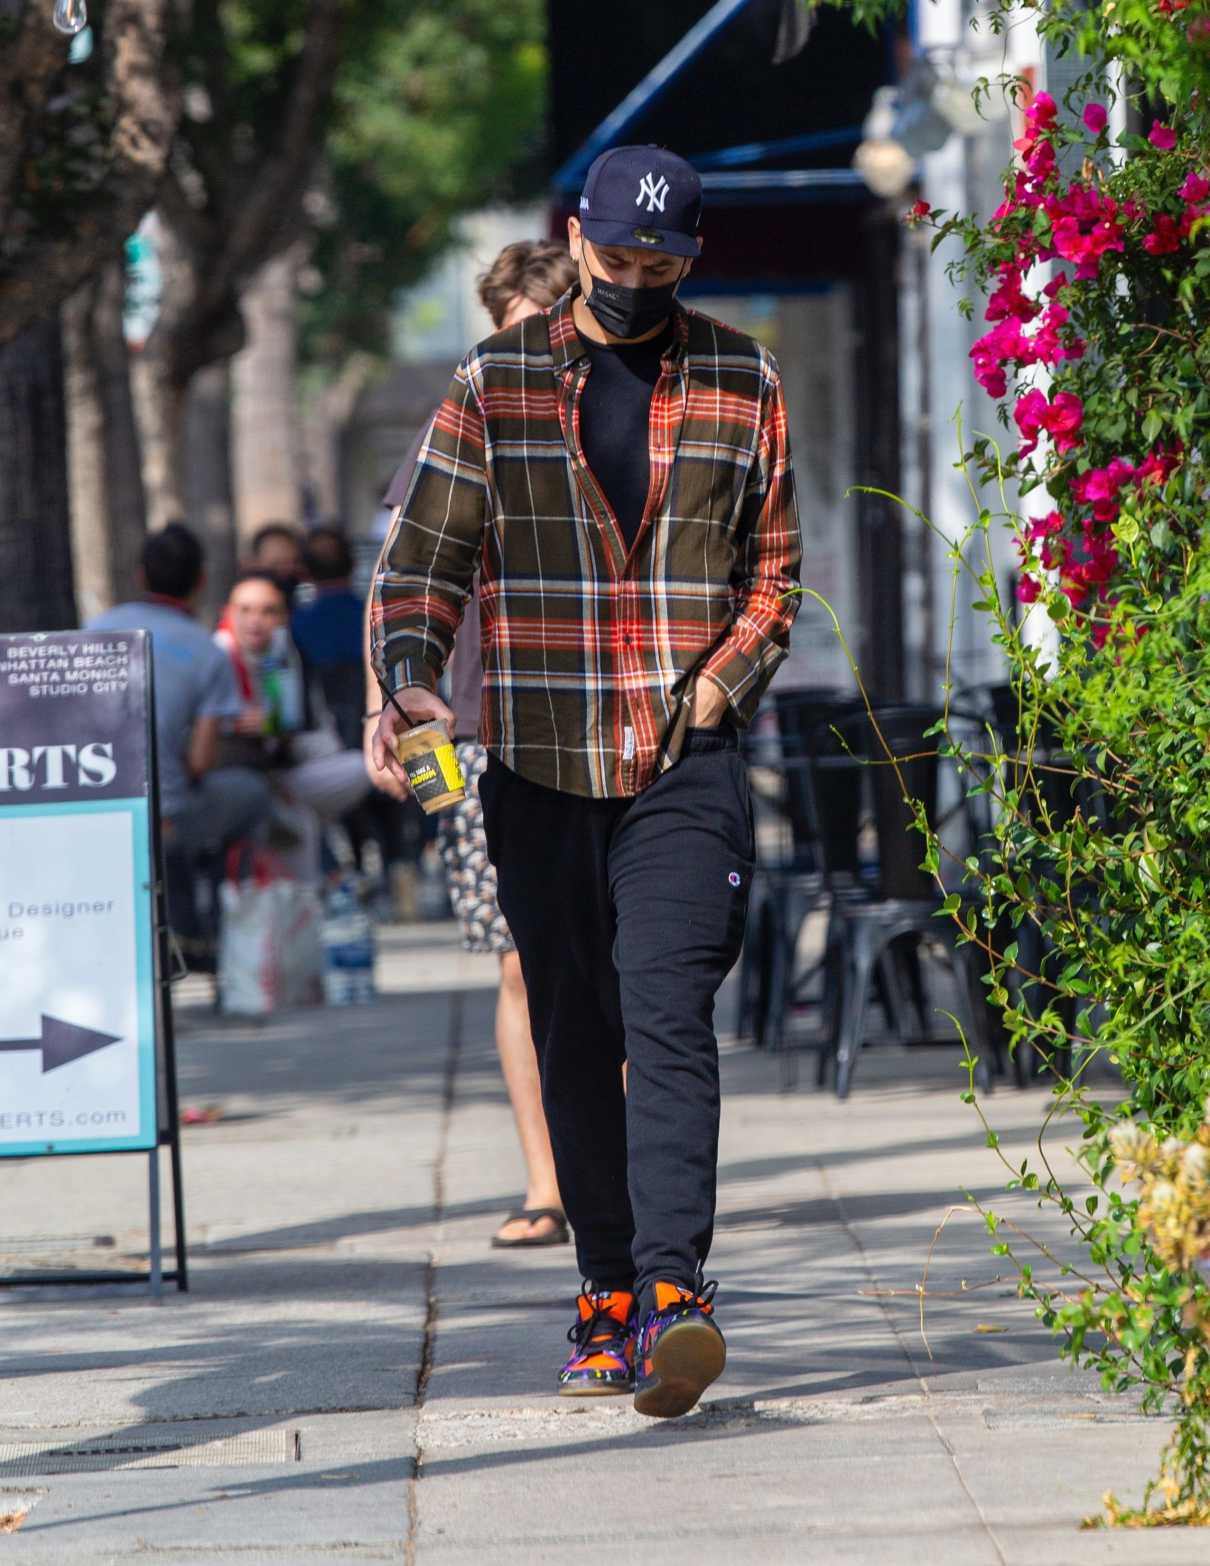 G Eazy In A Plaid Shirt Was Seen Out With Ashley Benson In Studio City 10 20 2020 1 